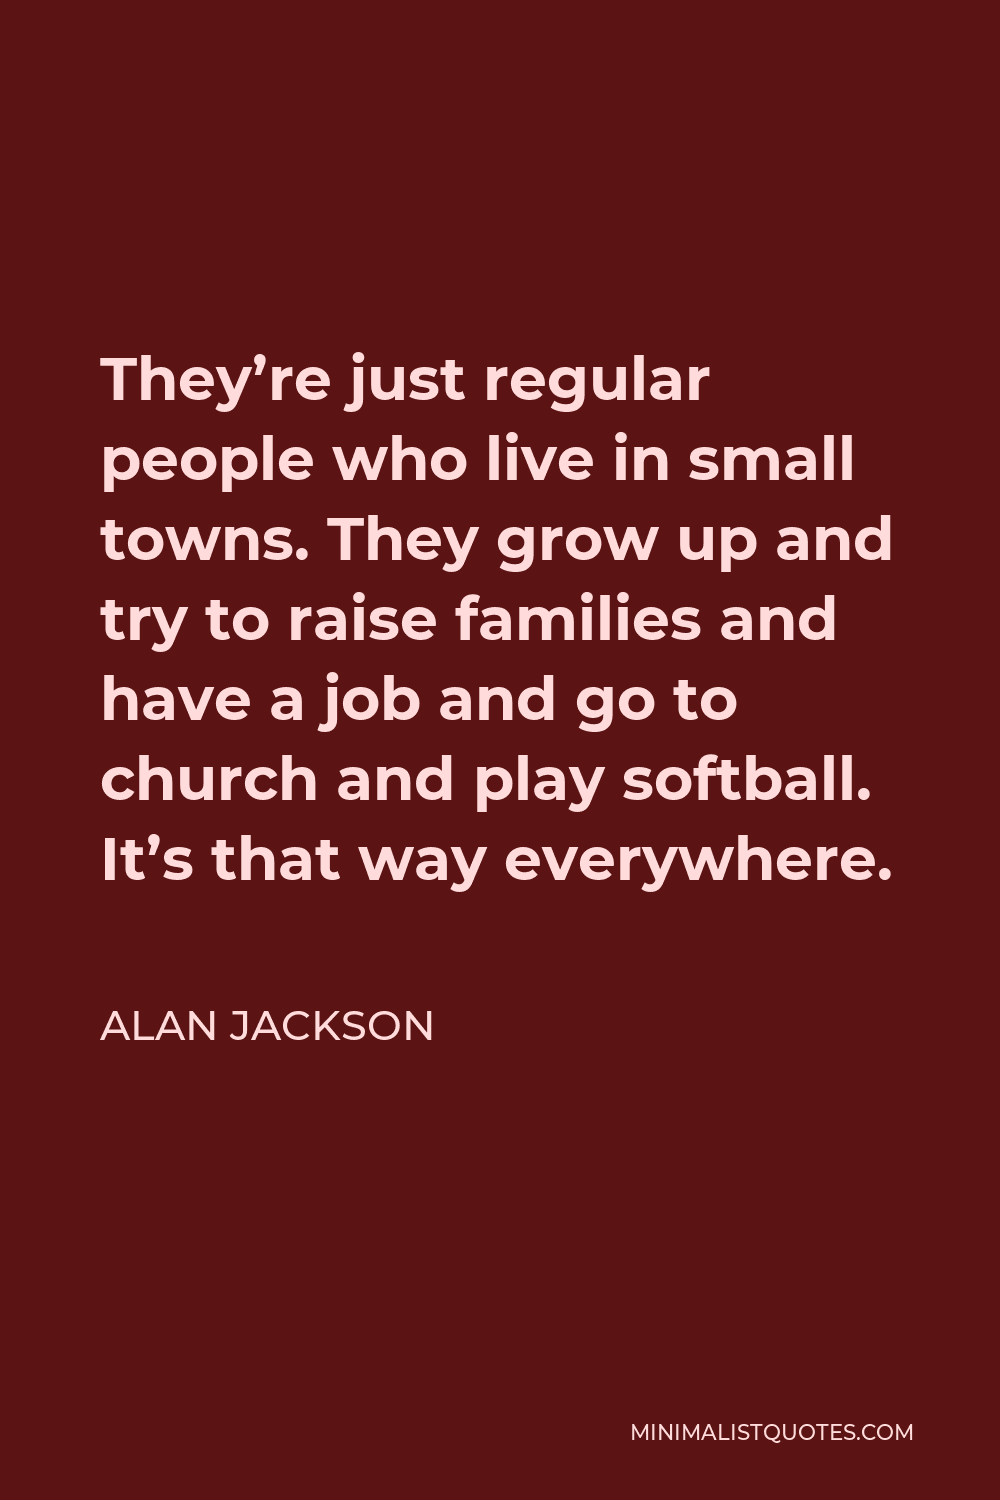 Alan Jackson Quote - They’re just regular people who live in small towns. They grow up and try to raise families and have a job and go to church and play softball. It’s that way everywhere.